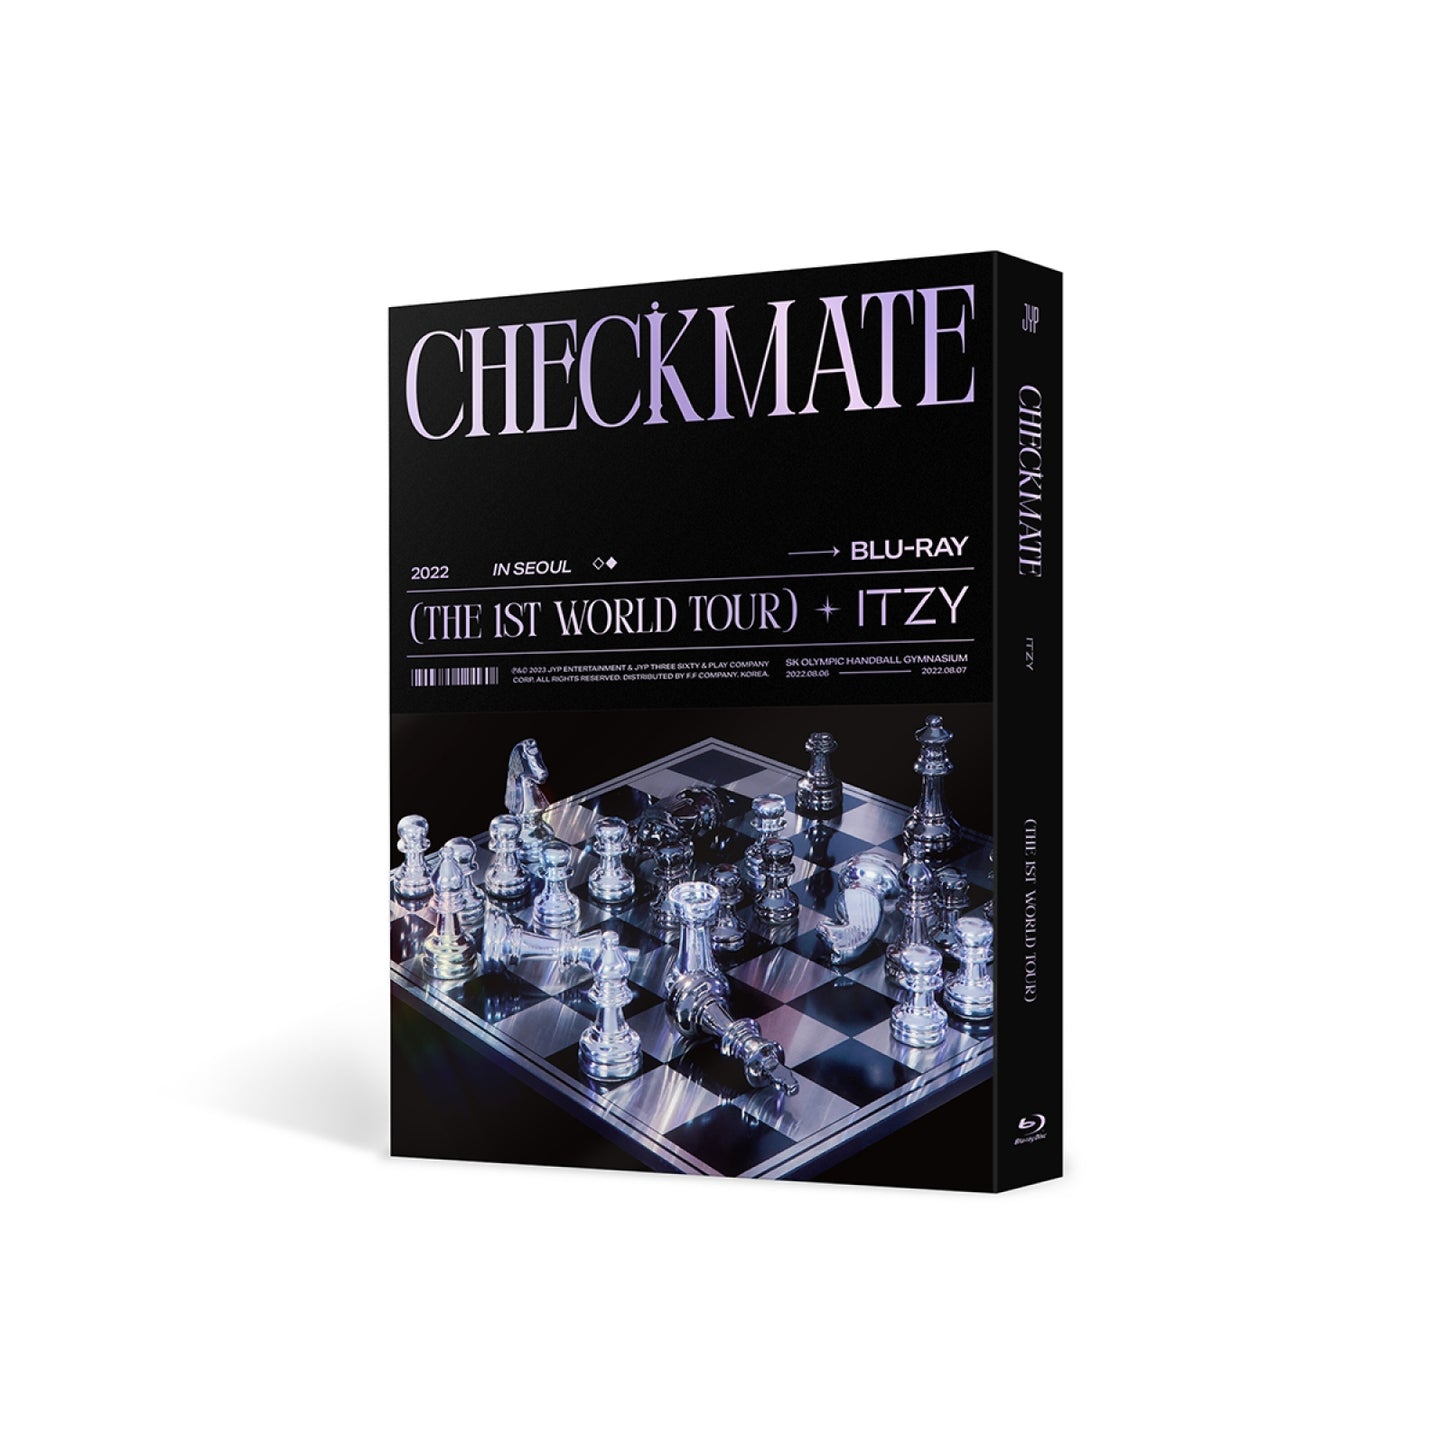 [ITZY] The 1st World Tour (Checkmate) in Seoul Blu-Ray